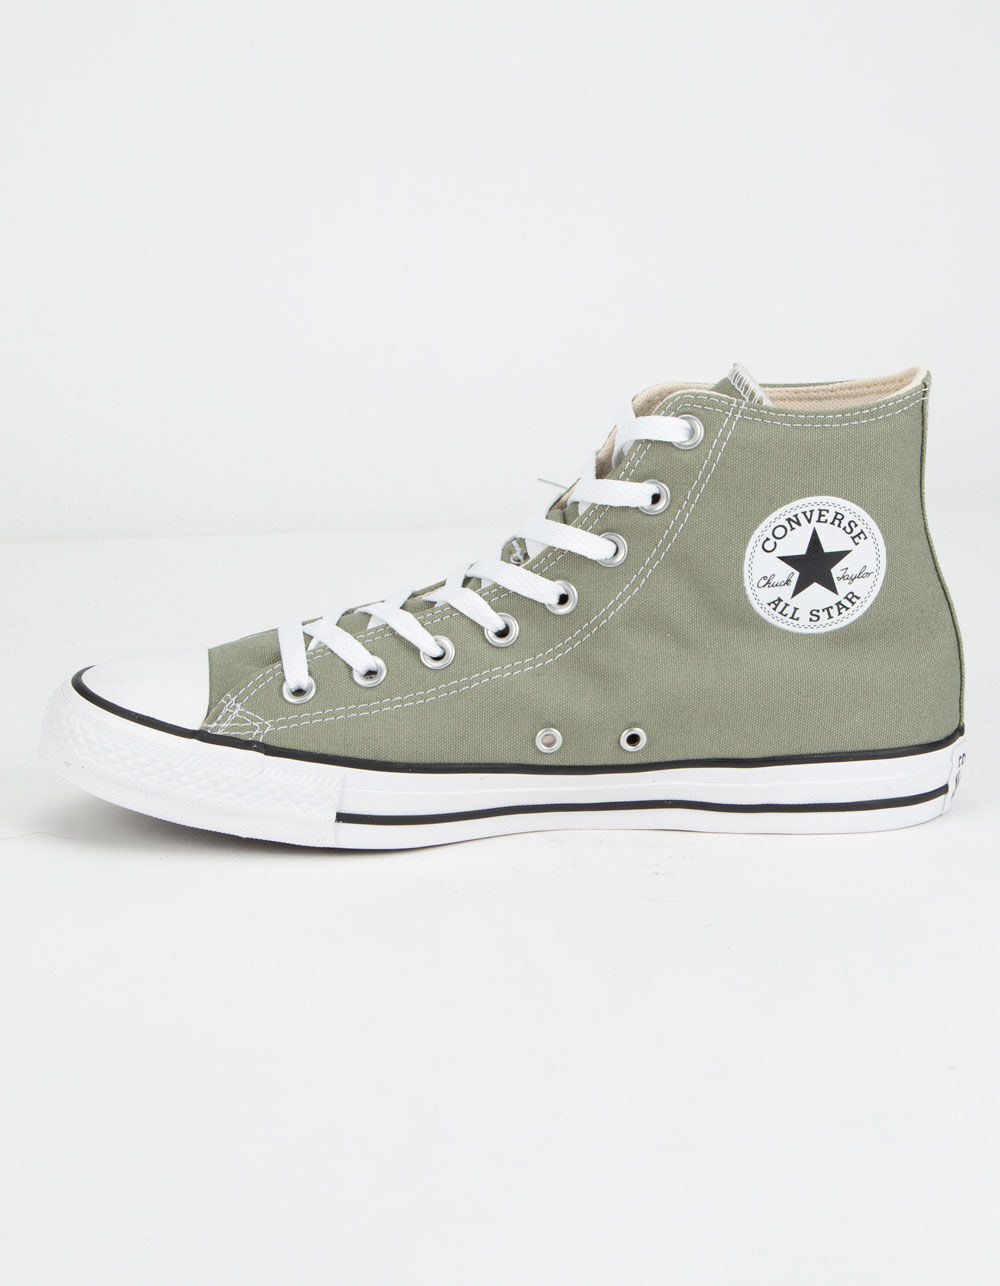 CONVERSE Chuck Taylor All Star Jade Stone High Top Shoes - JADE STONE ...